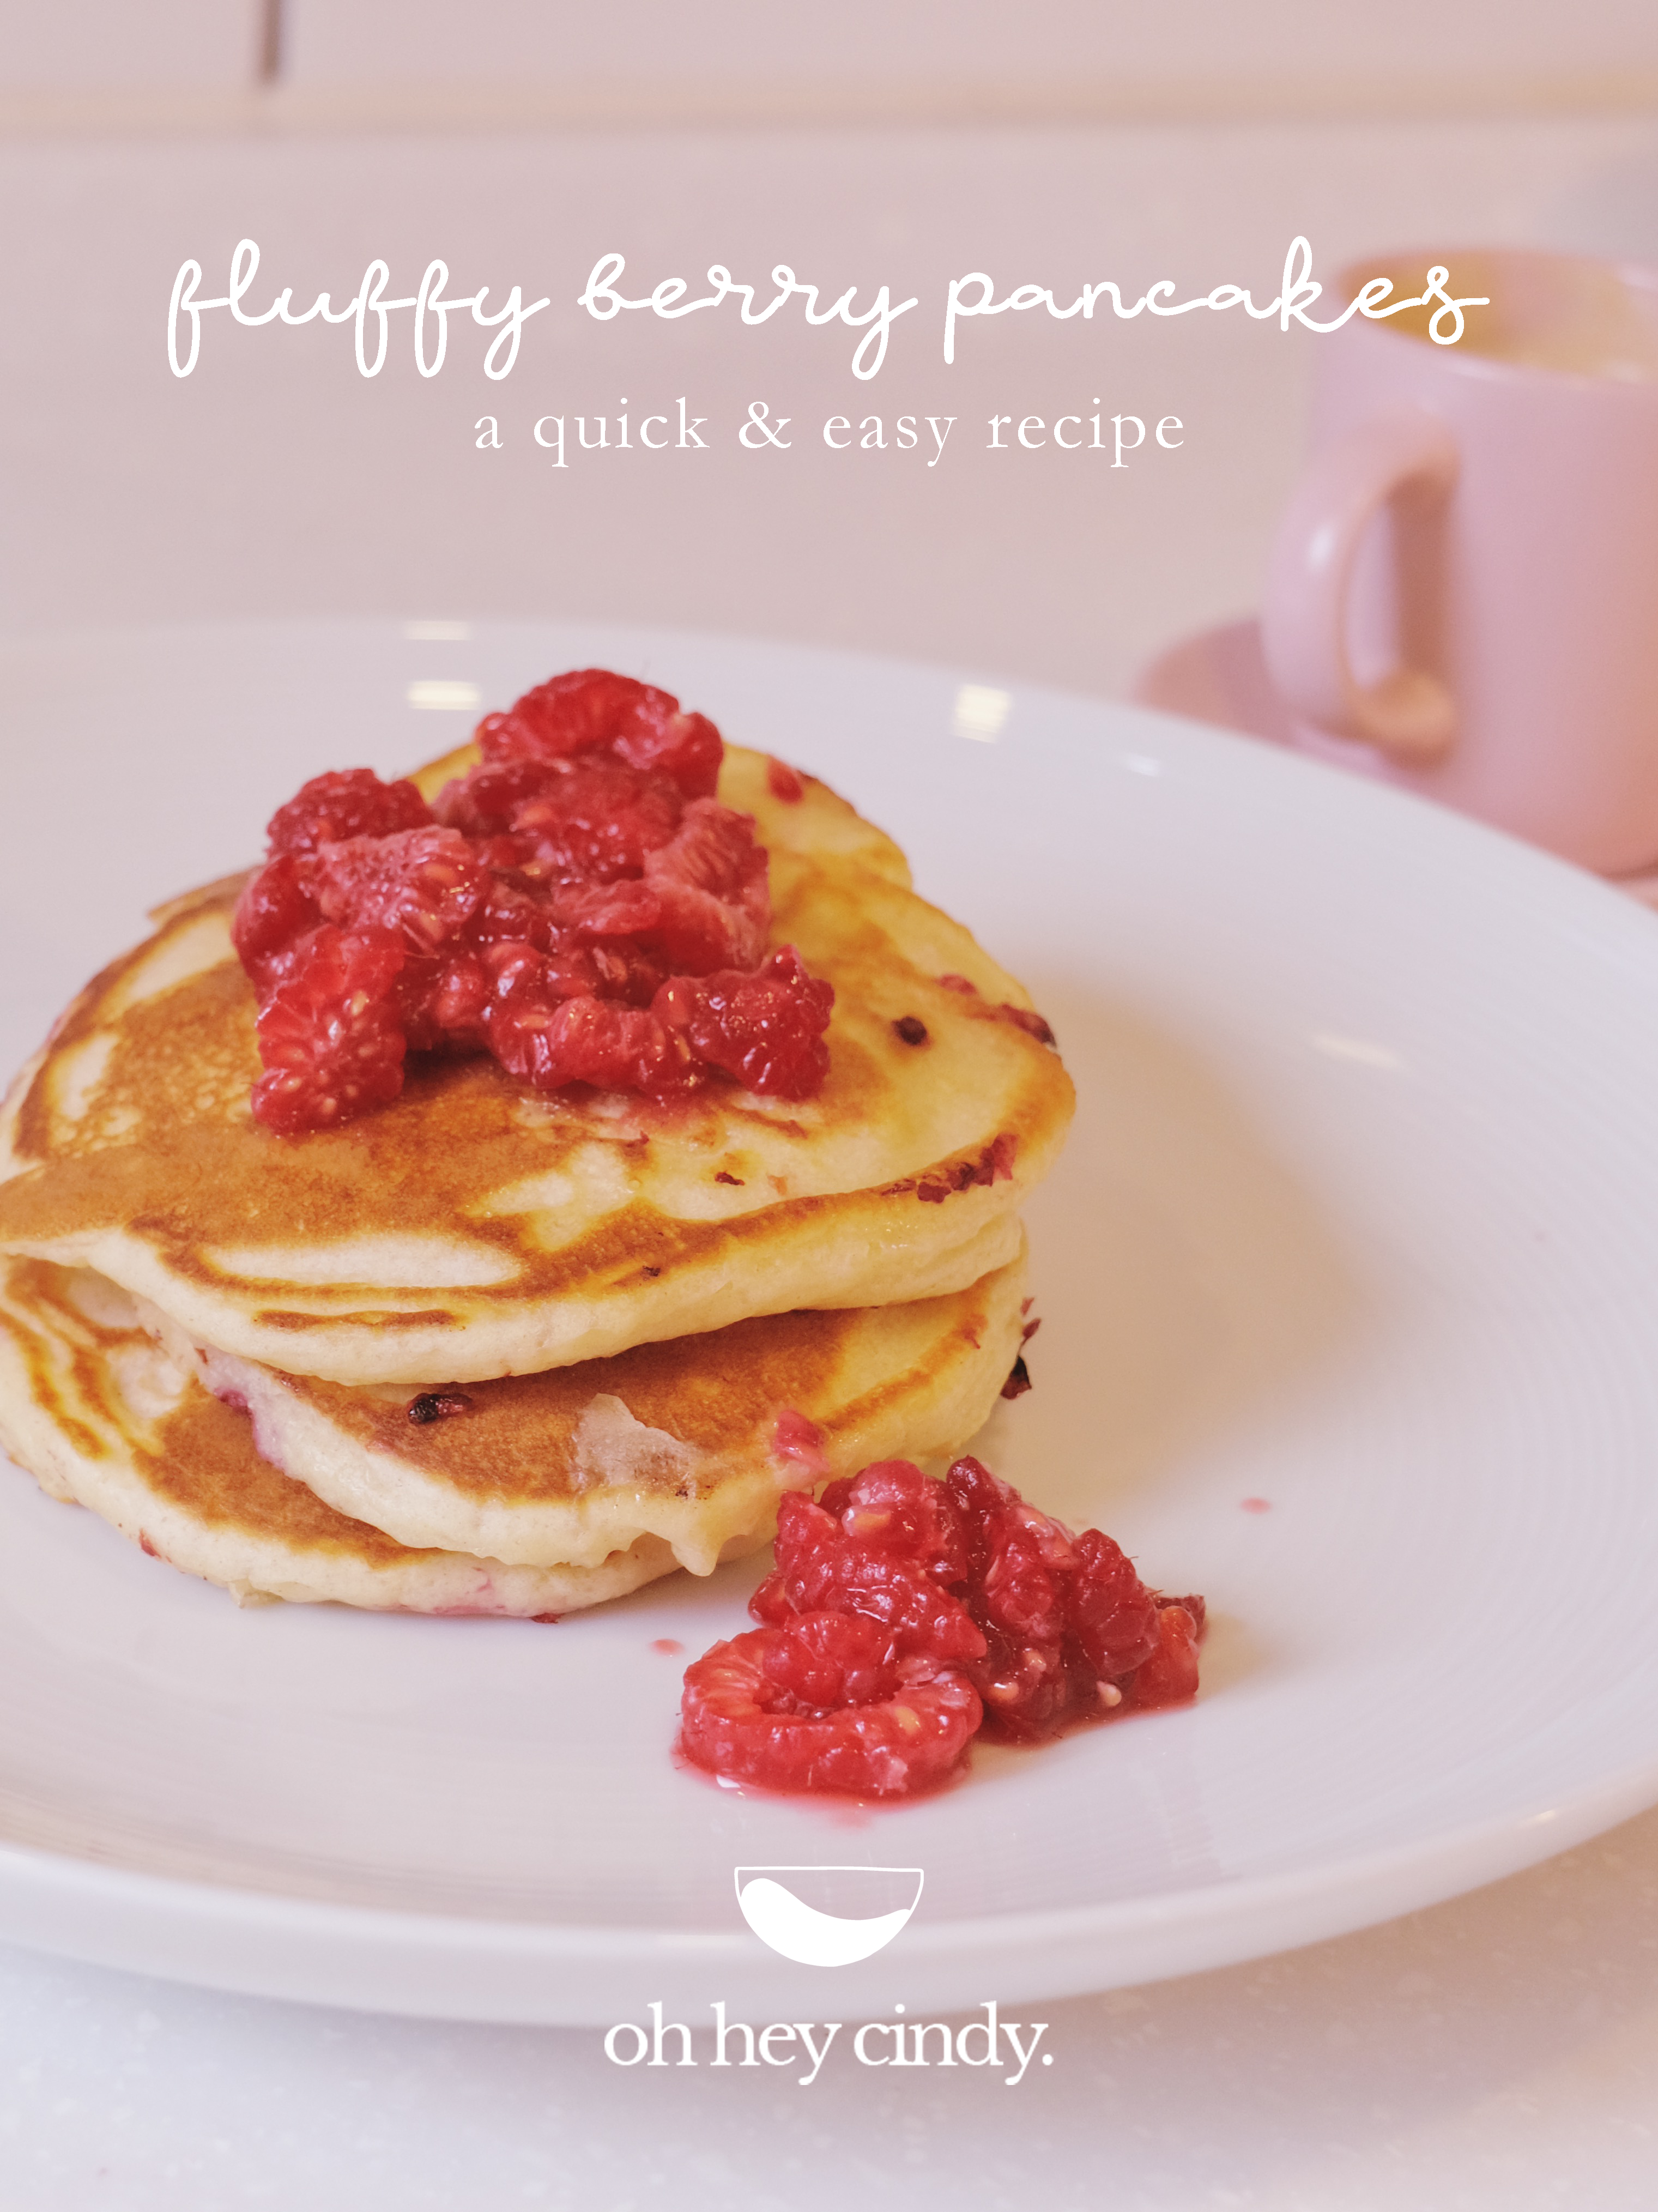 Oh Hey Cindy - Fluffy Berry Pancakes